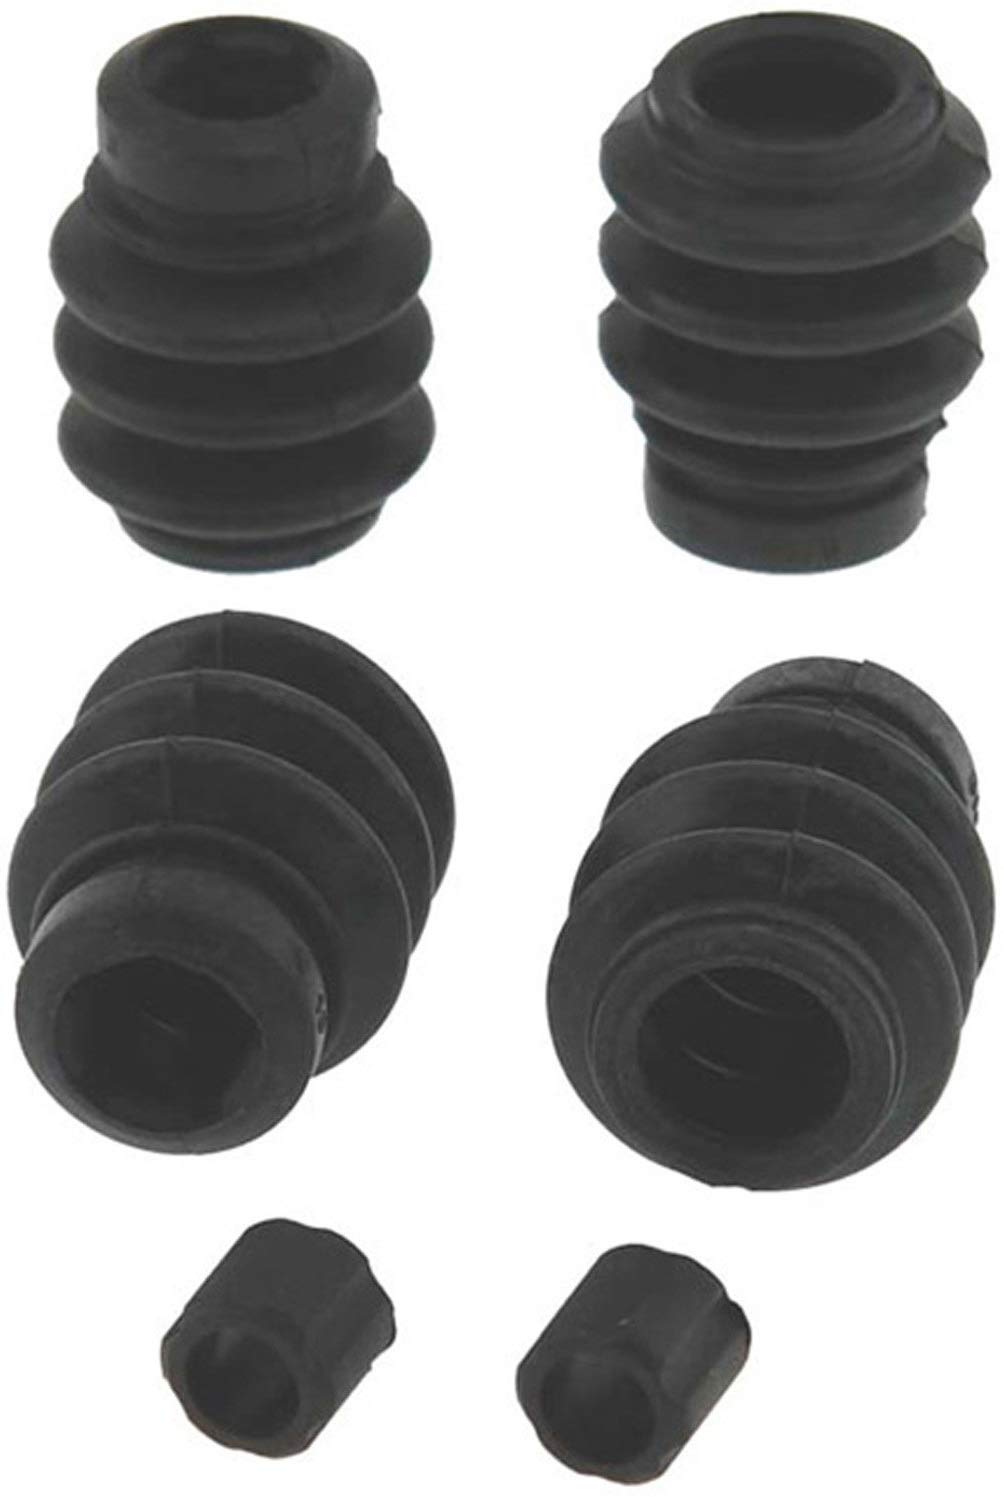 ACDelco 18K1929 Professional Front Disc Brake Caliper Rubber Bushing Kit with Seals and Bushings